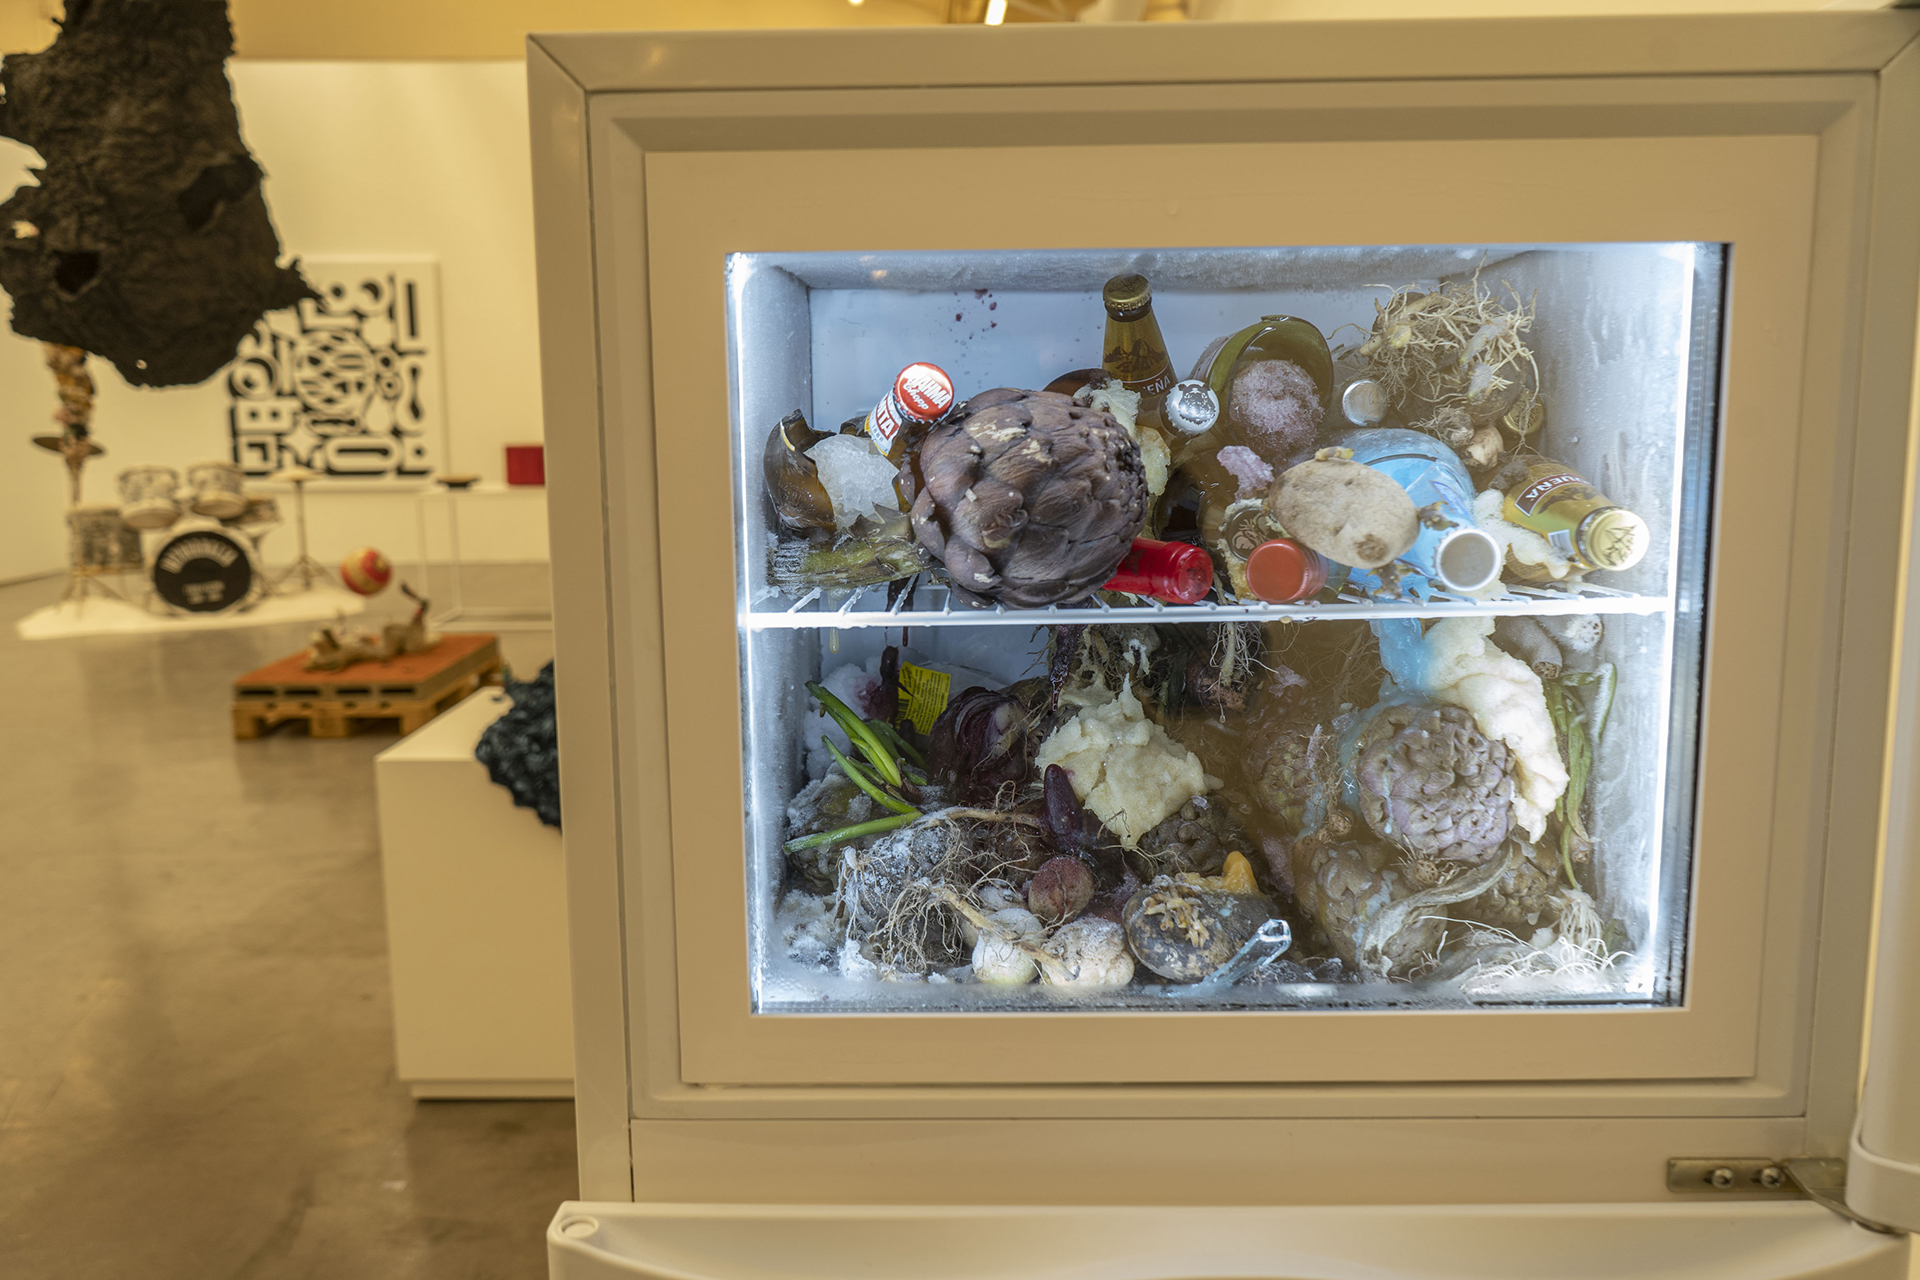 A glass-enclosed refrigerator with rotting food, from the series "Renaissance" by the artist Adrián Villar Rojas (photo pepe mateos)